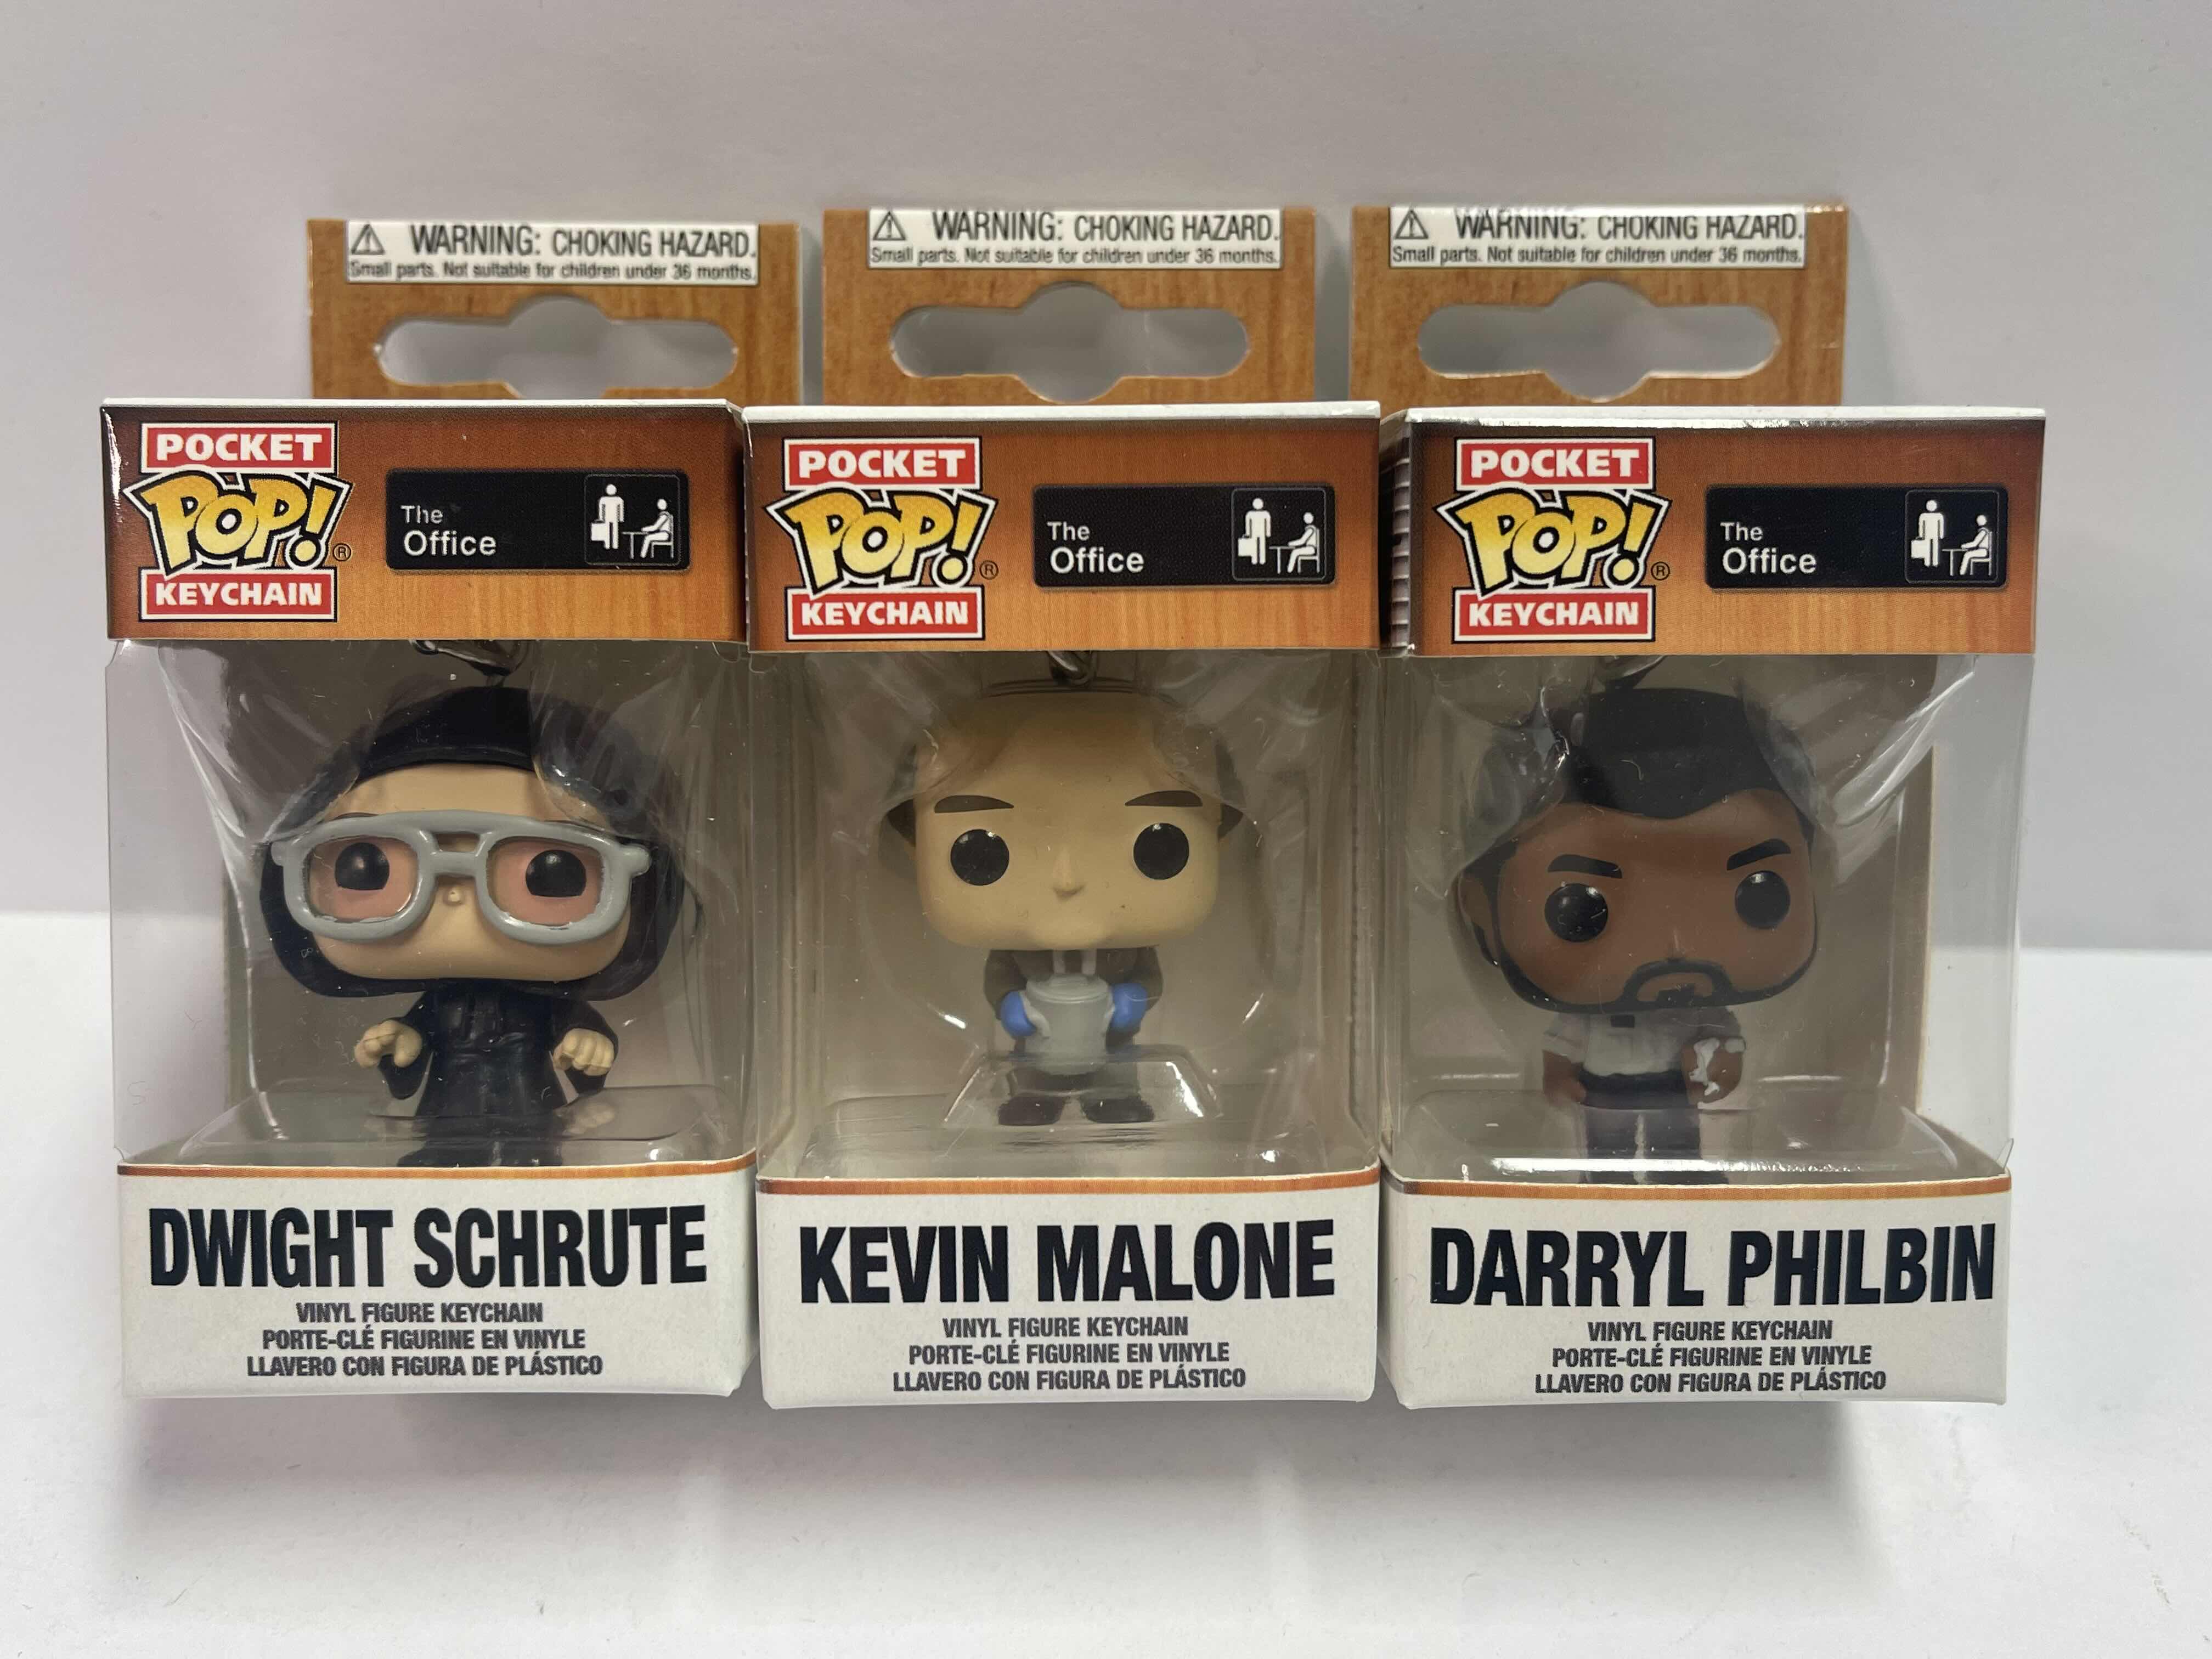 Photo 1 of NEW 3 POCKET POP KEYCHAINS “THE OFFICE “ - DARRYL PHILBIN , KEVIN MALONE & DWIGHT SCHRUTE - TOTAL RETAIL PRICE $ 36.00